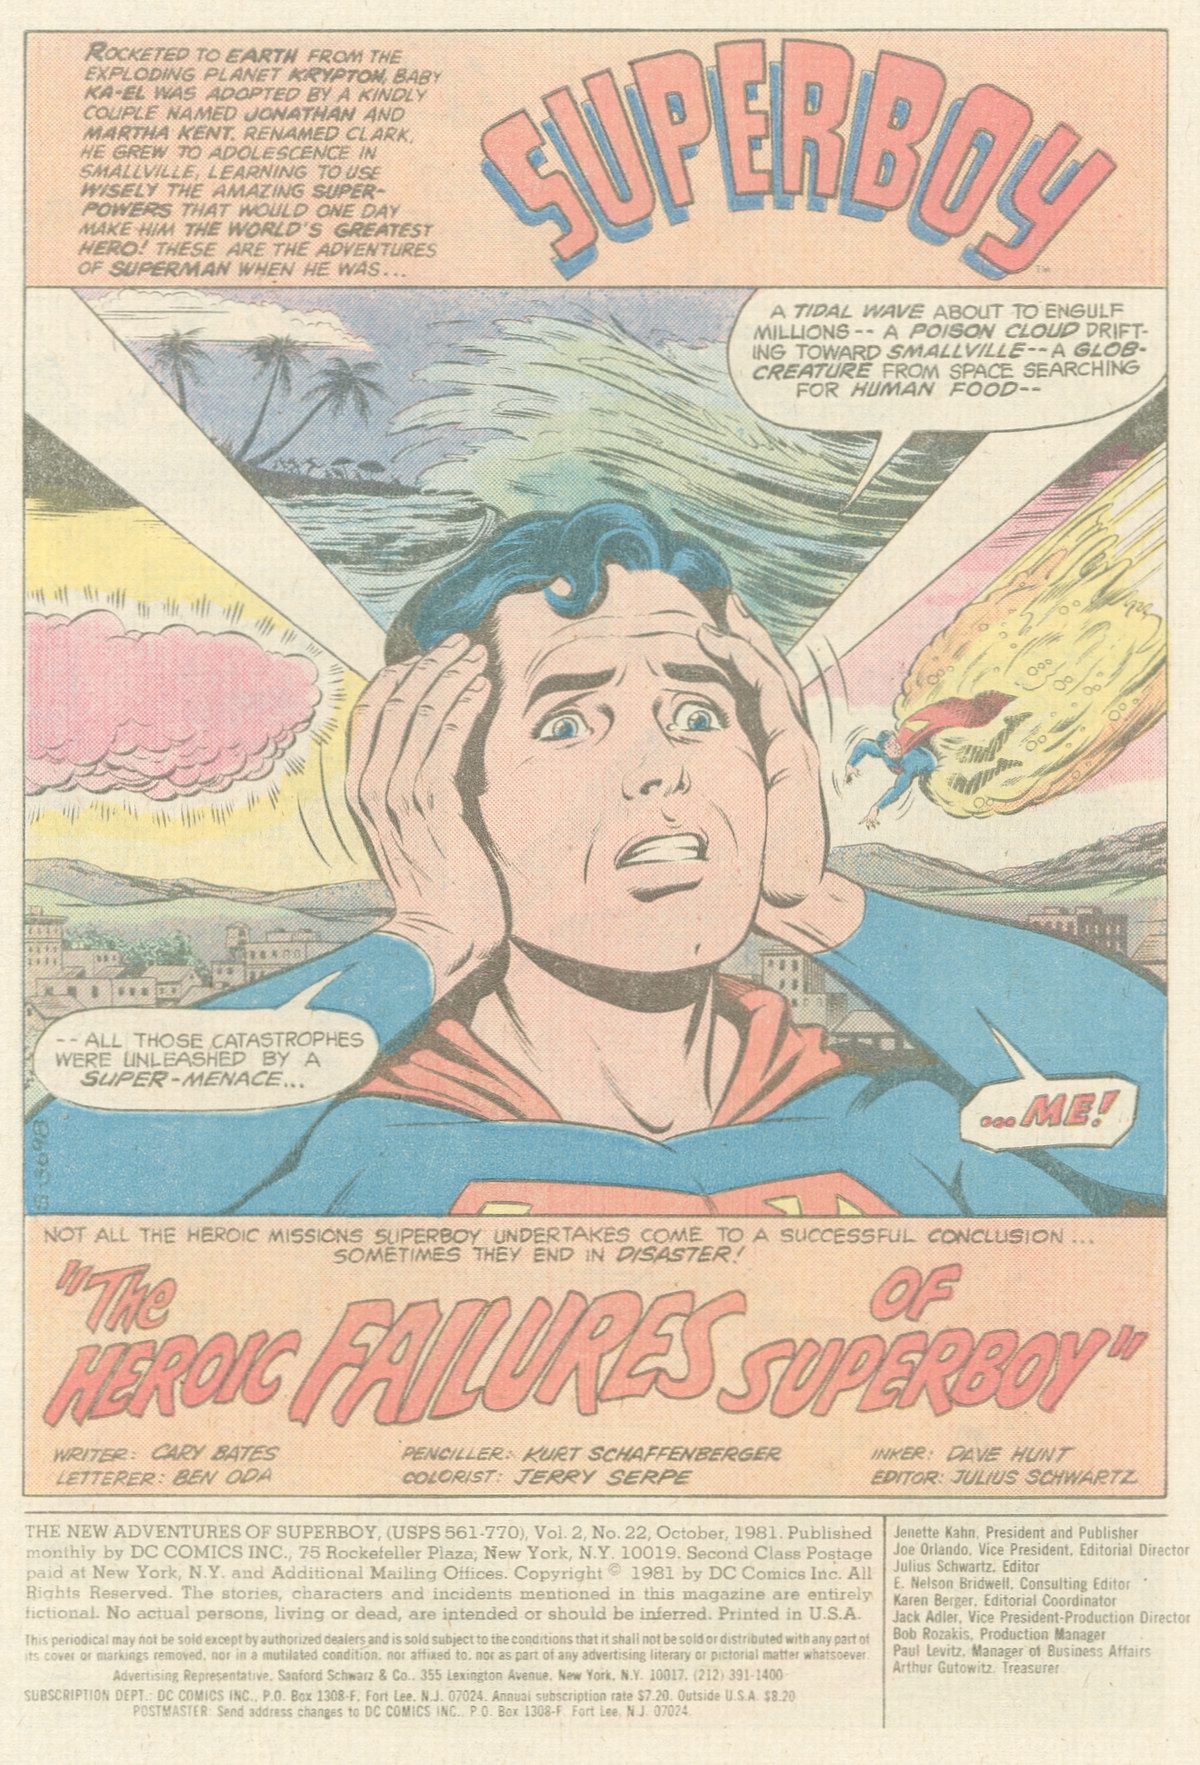 The New Adventures of Superboy 22 Page 1